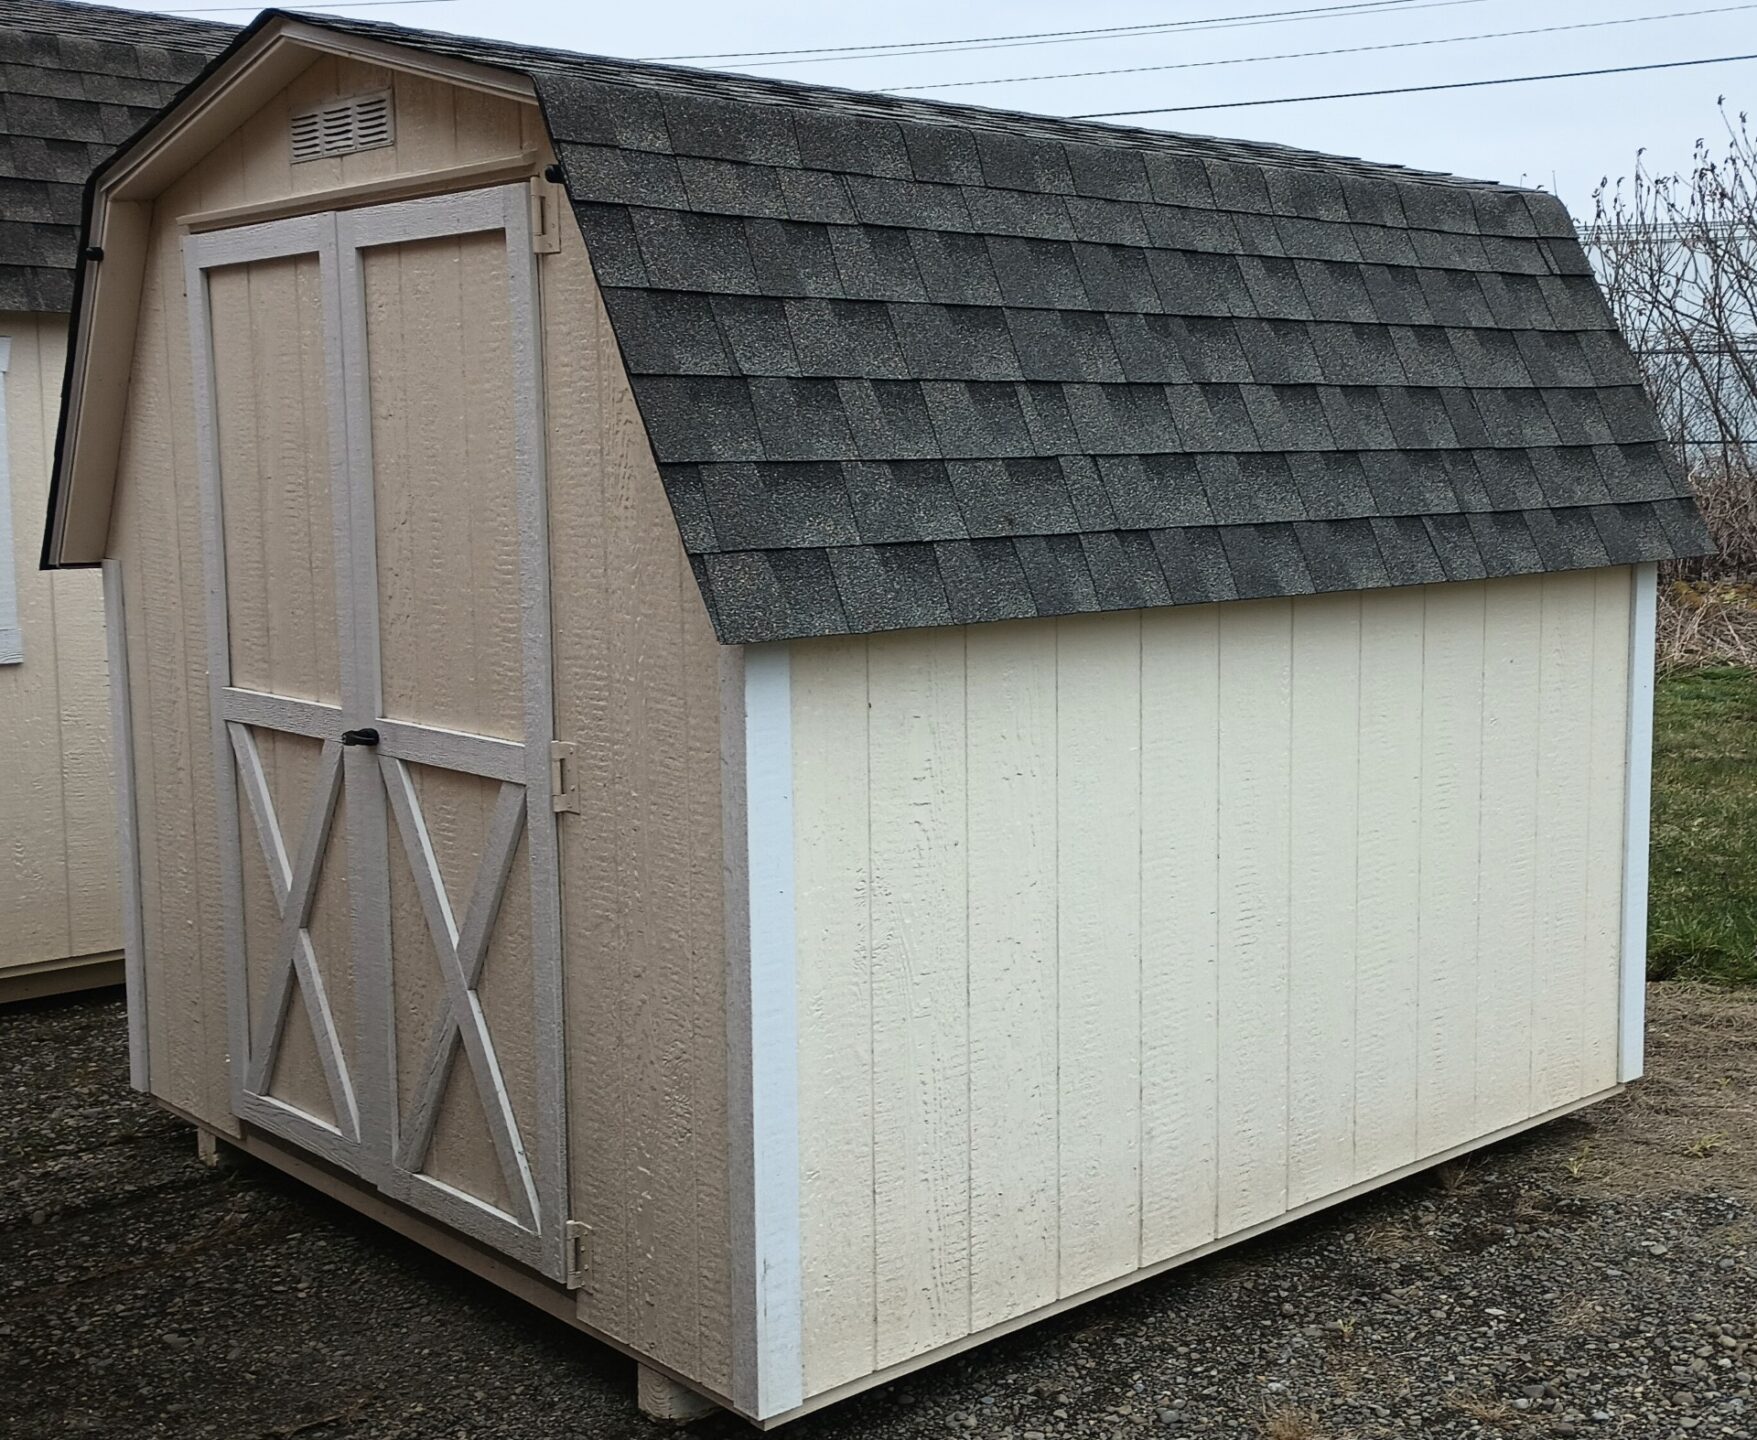 Small shed with barn style roof, double doors, shingle roof and single window on back wall